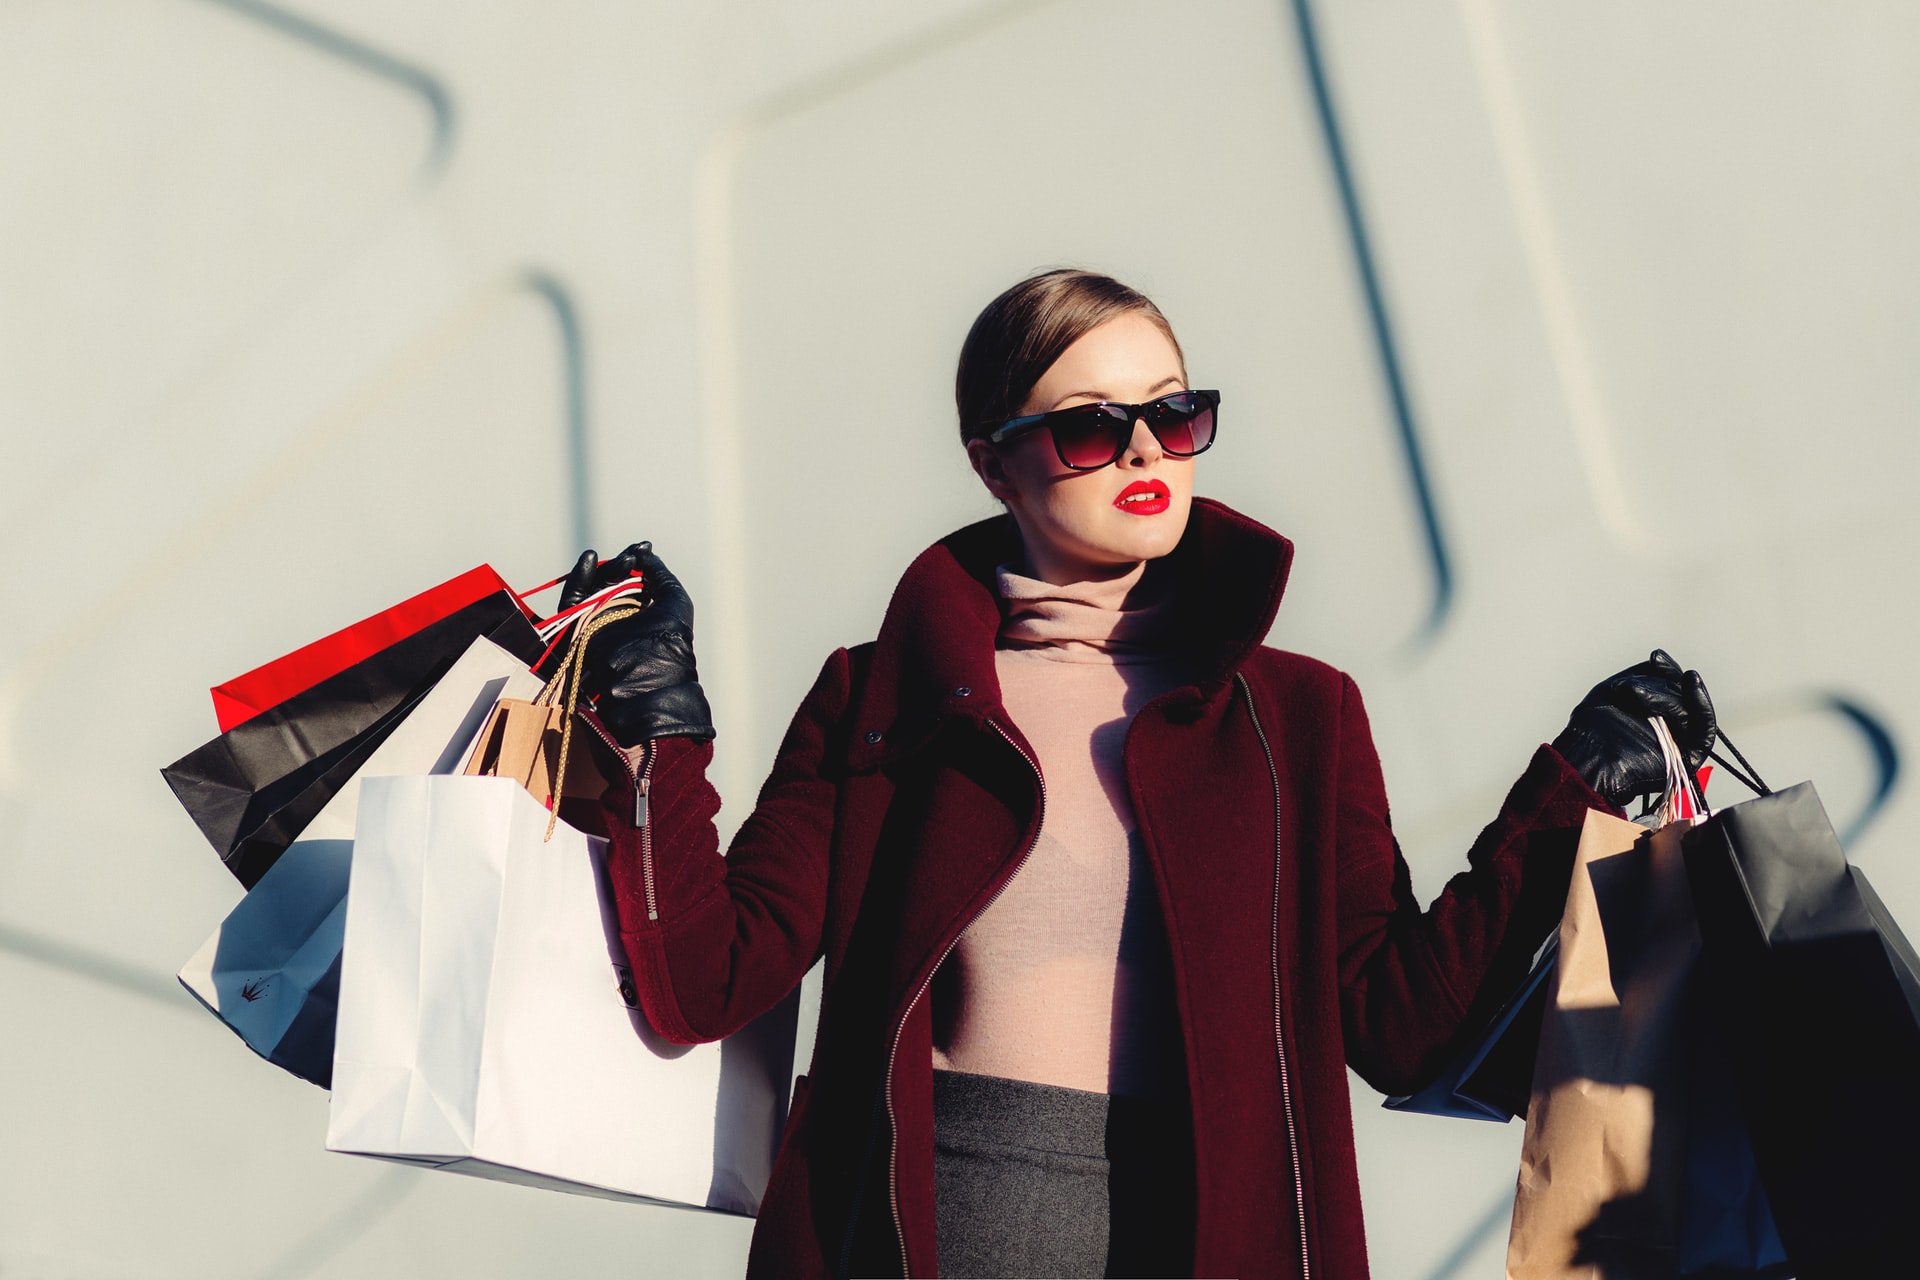 How to Get Holiday Season Cash by Leveraging Your Past Purchases